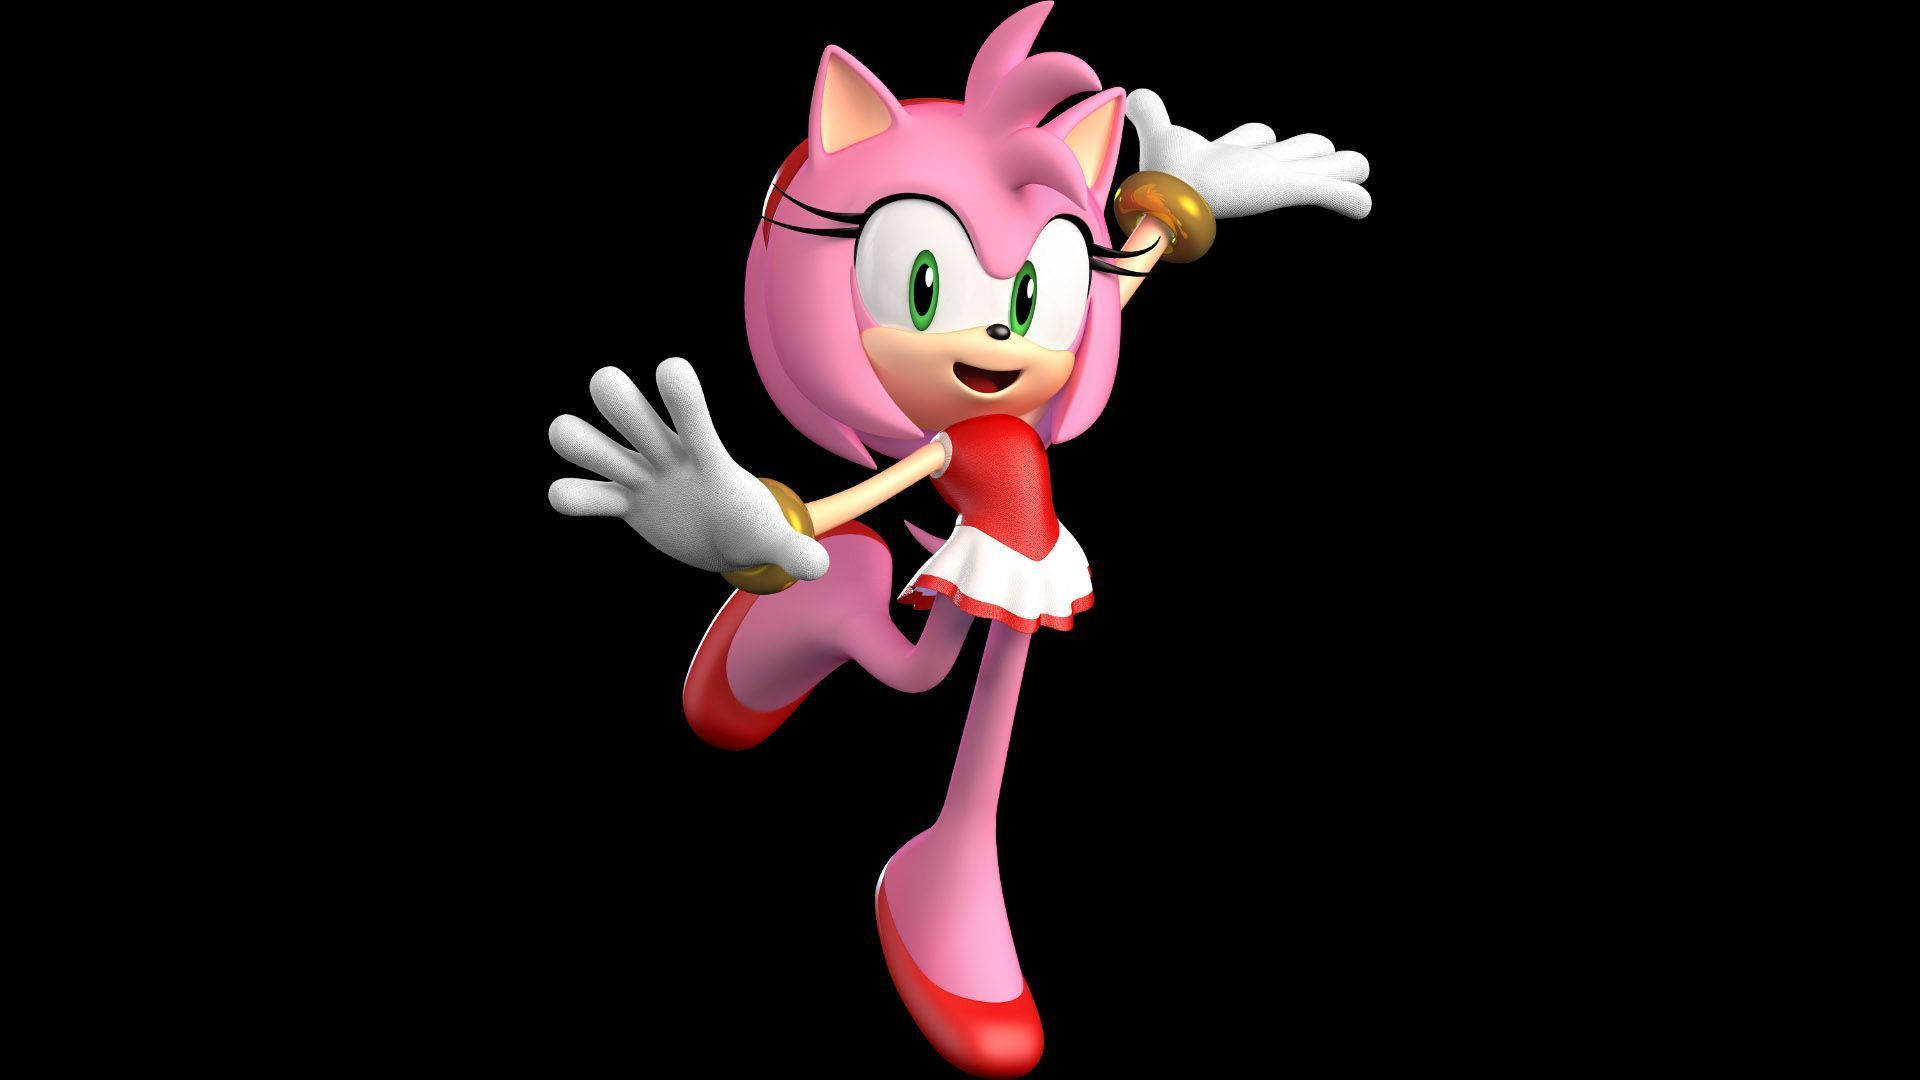 Amy Rose 2012 Olympic Game Background